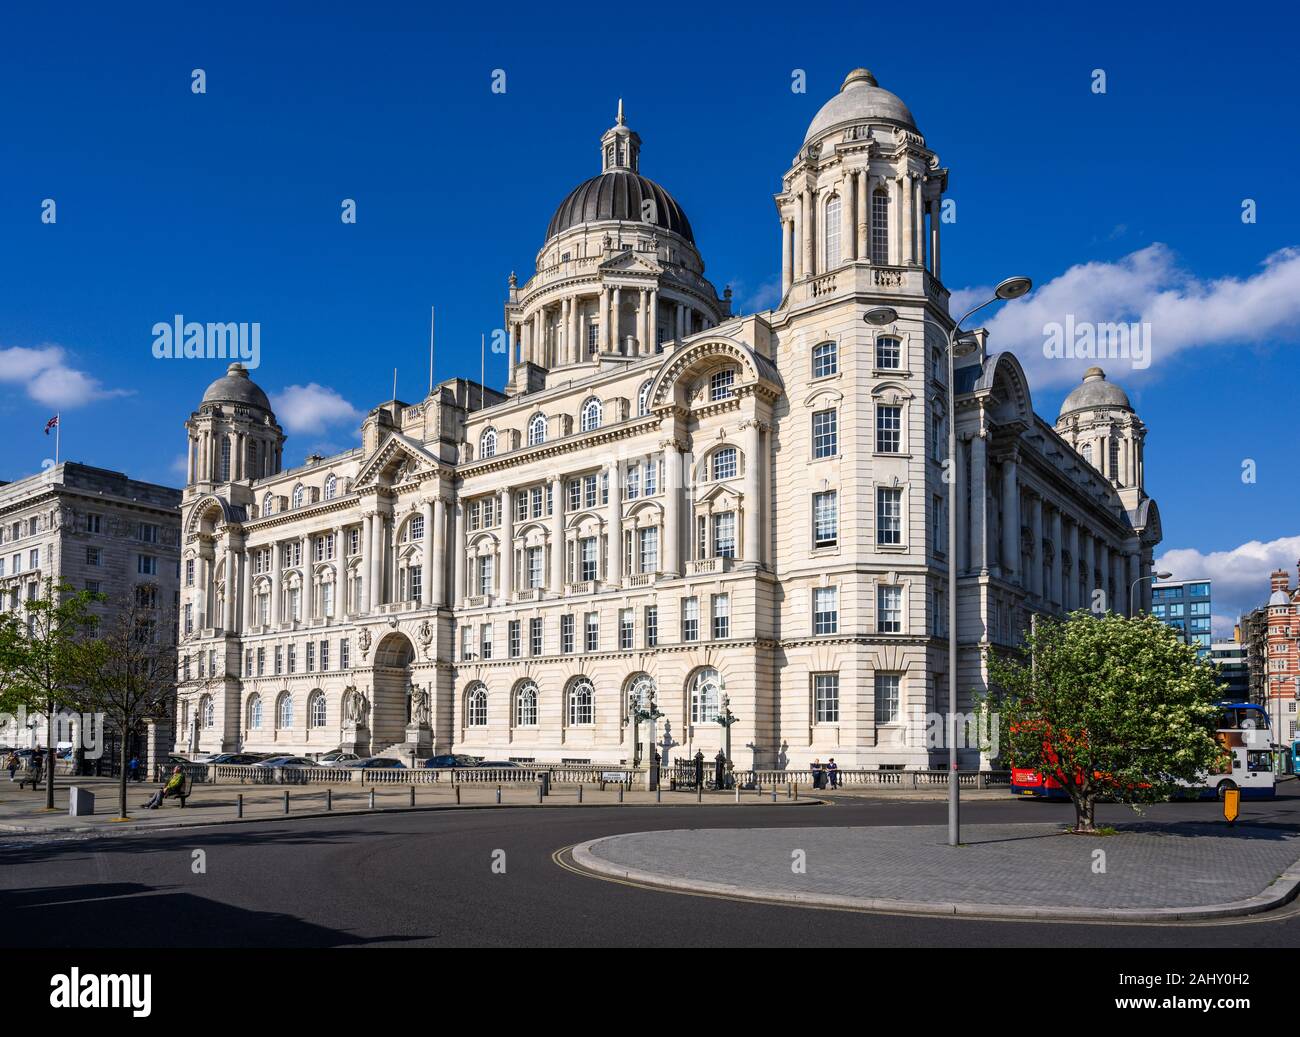 The Port of Liverpool Building (1907) is one of the Three Graces on Pier Head, Liverpool, England, UK. Stock Photo